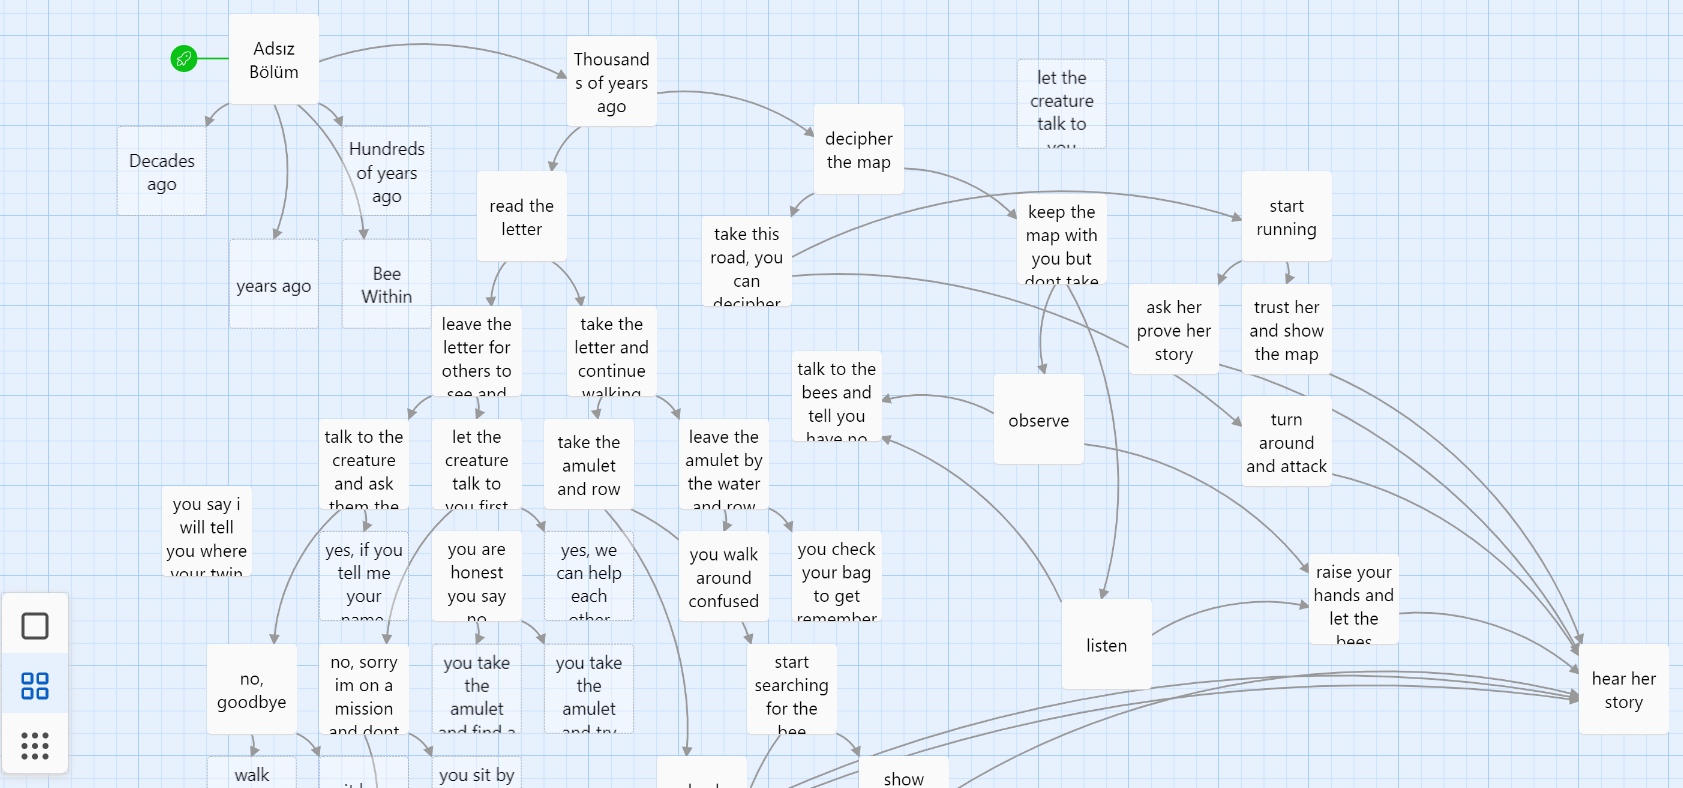 "The twine map of text based story, reachable from Bee Within."